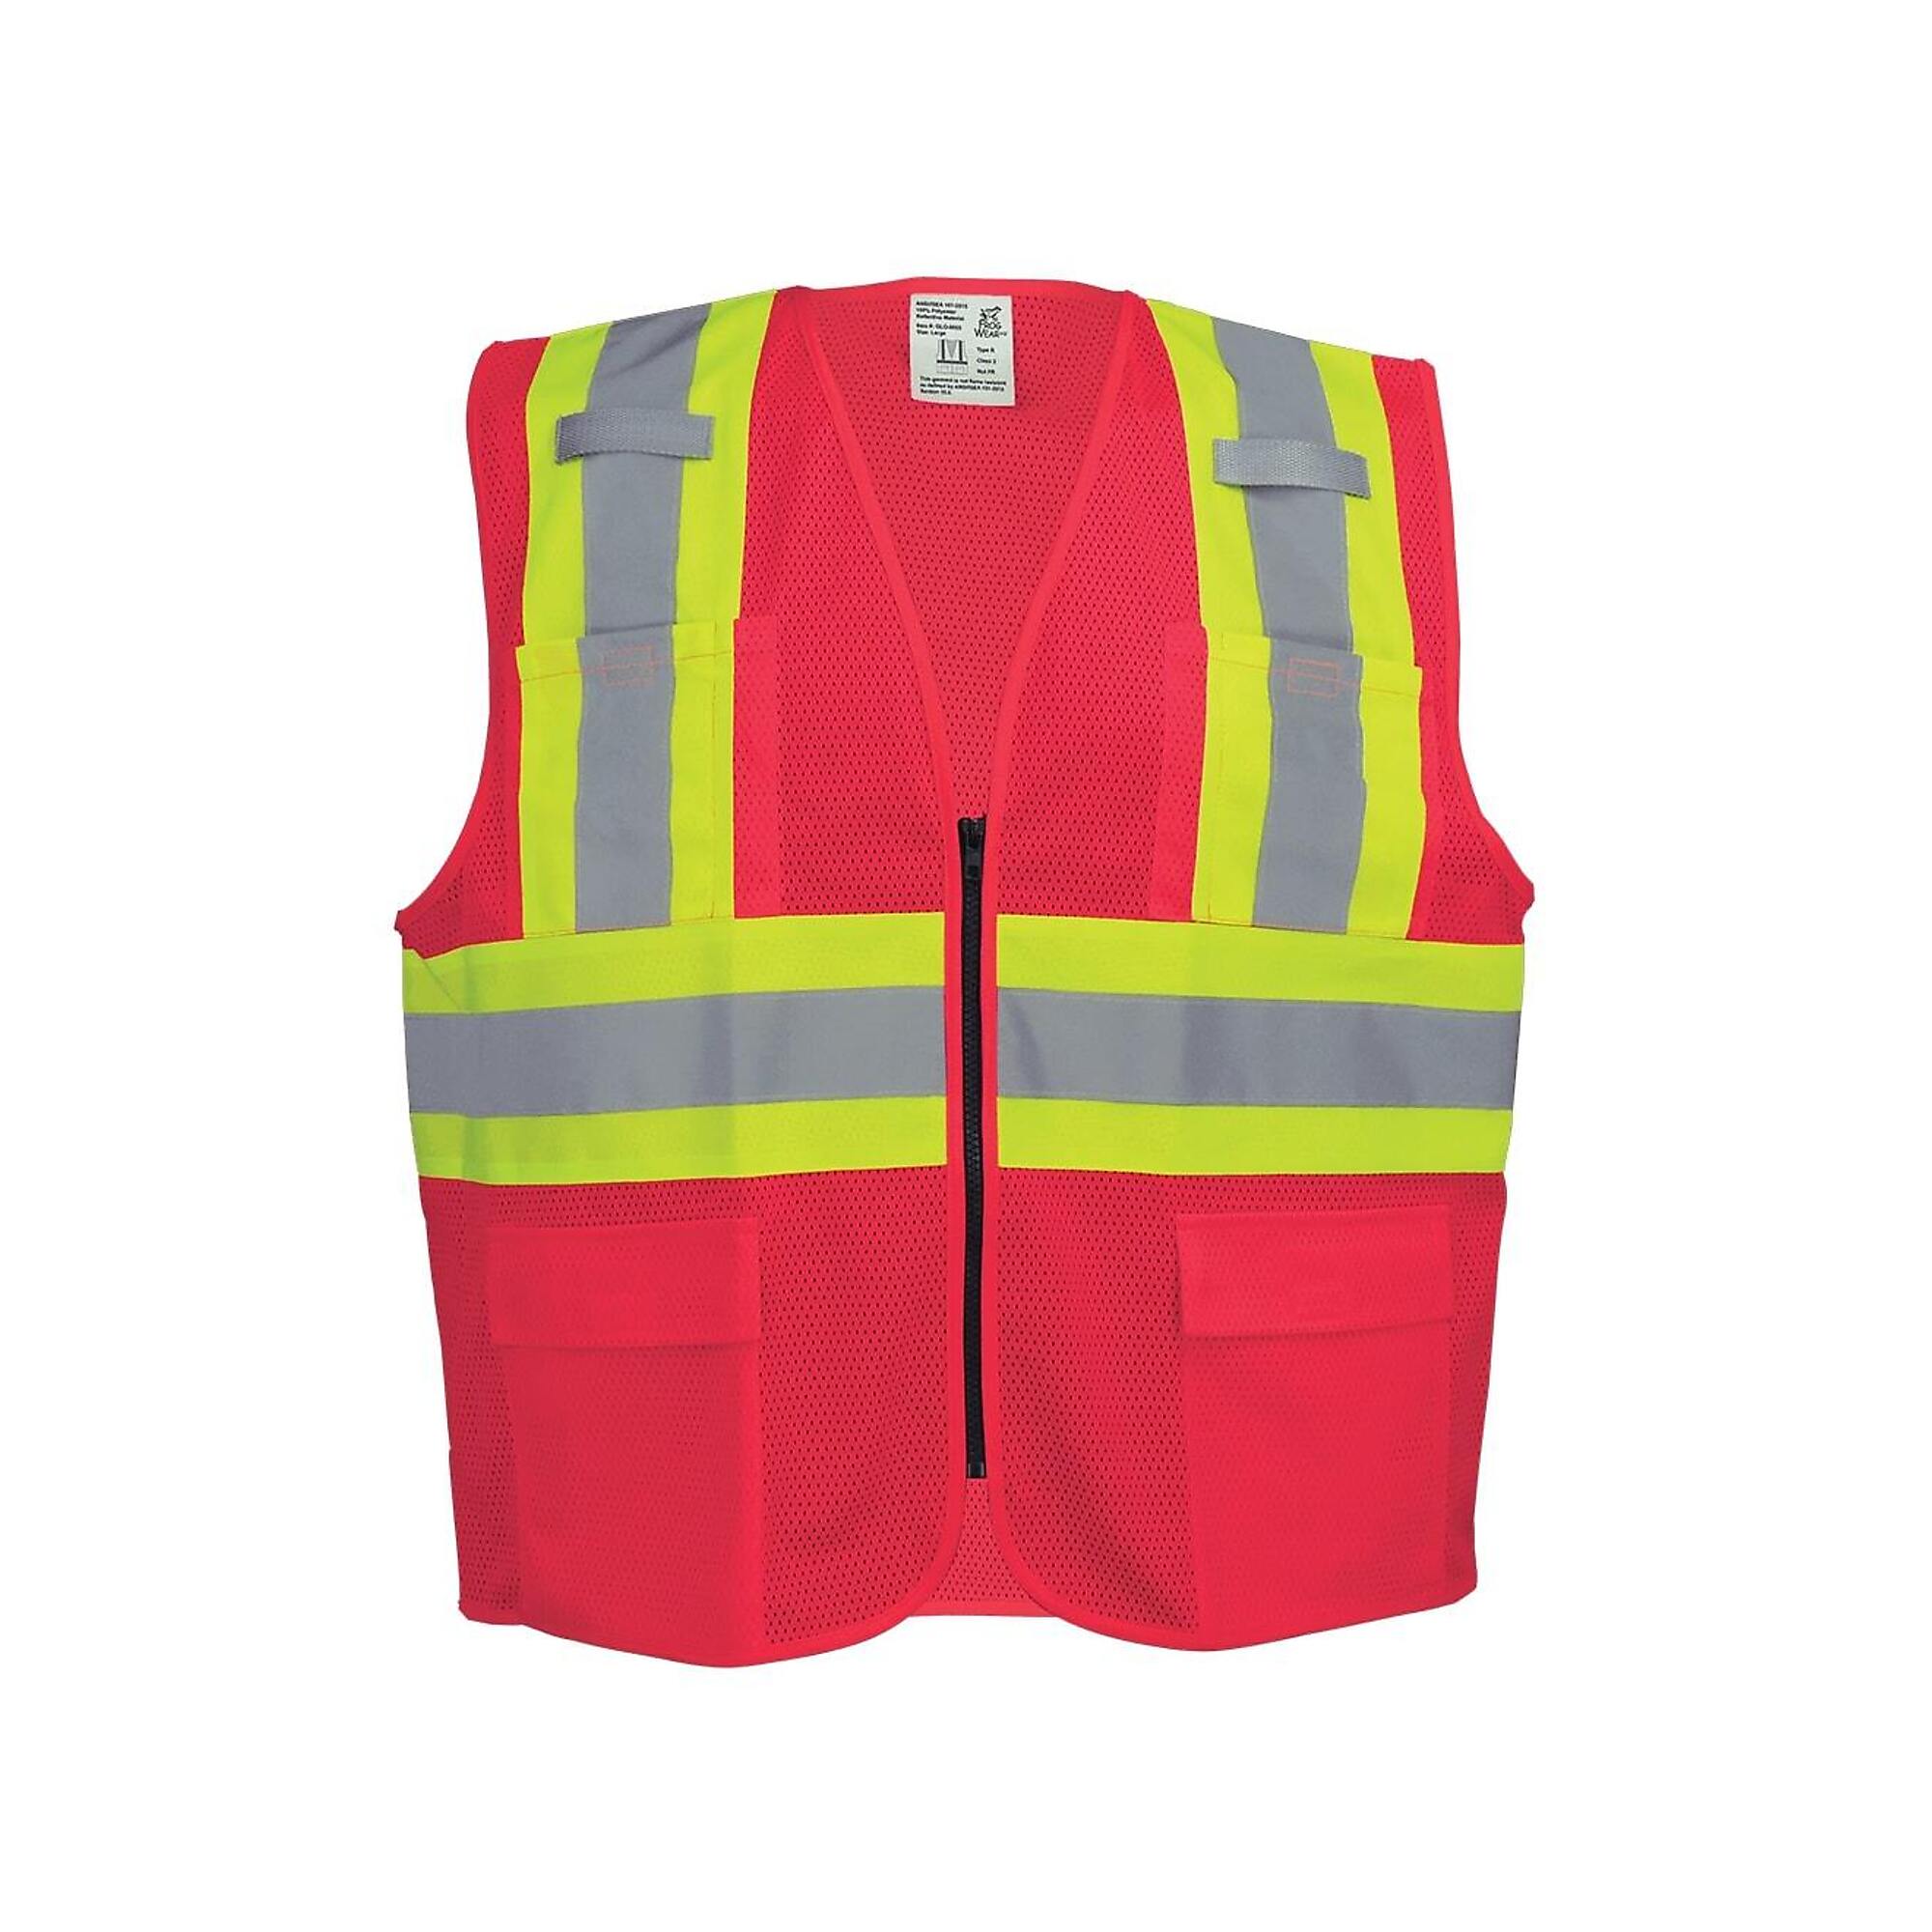 FrogWear, HV Red, Class 2 6 Pockets, Mesh Vest, Size 6XL, Color High-Visibility Red, Model GLO-0055-6XL